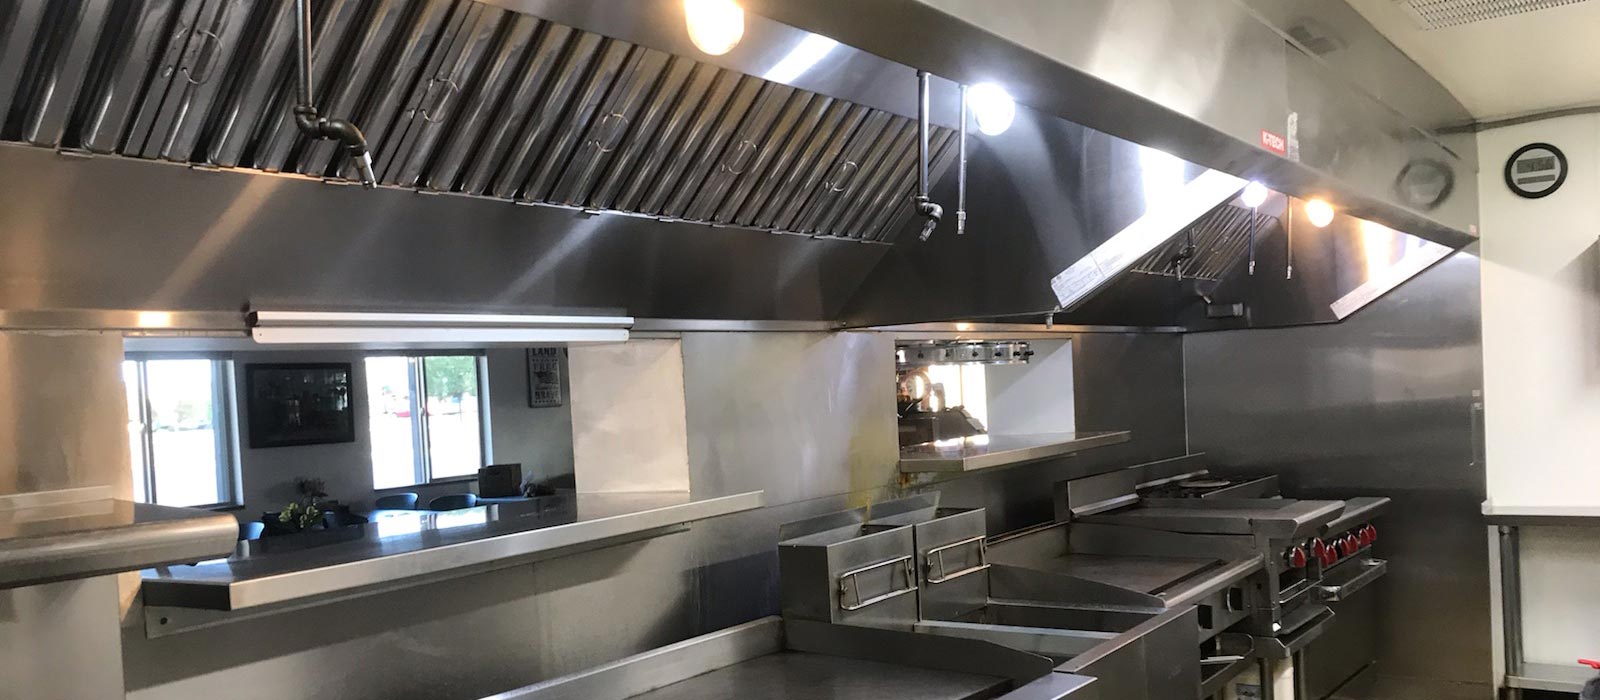 Restaurant and Exhaust Hood Cleaning